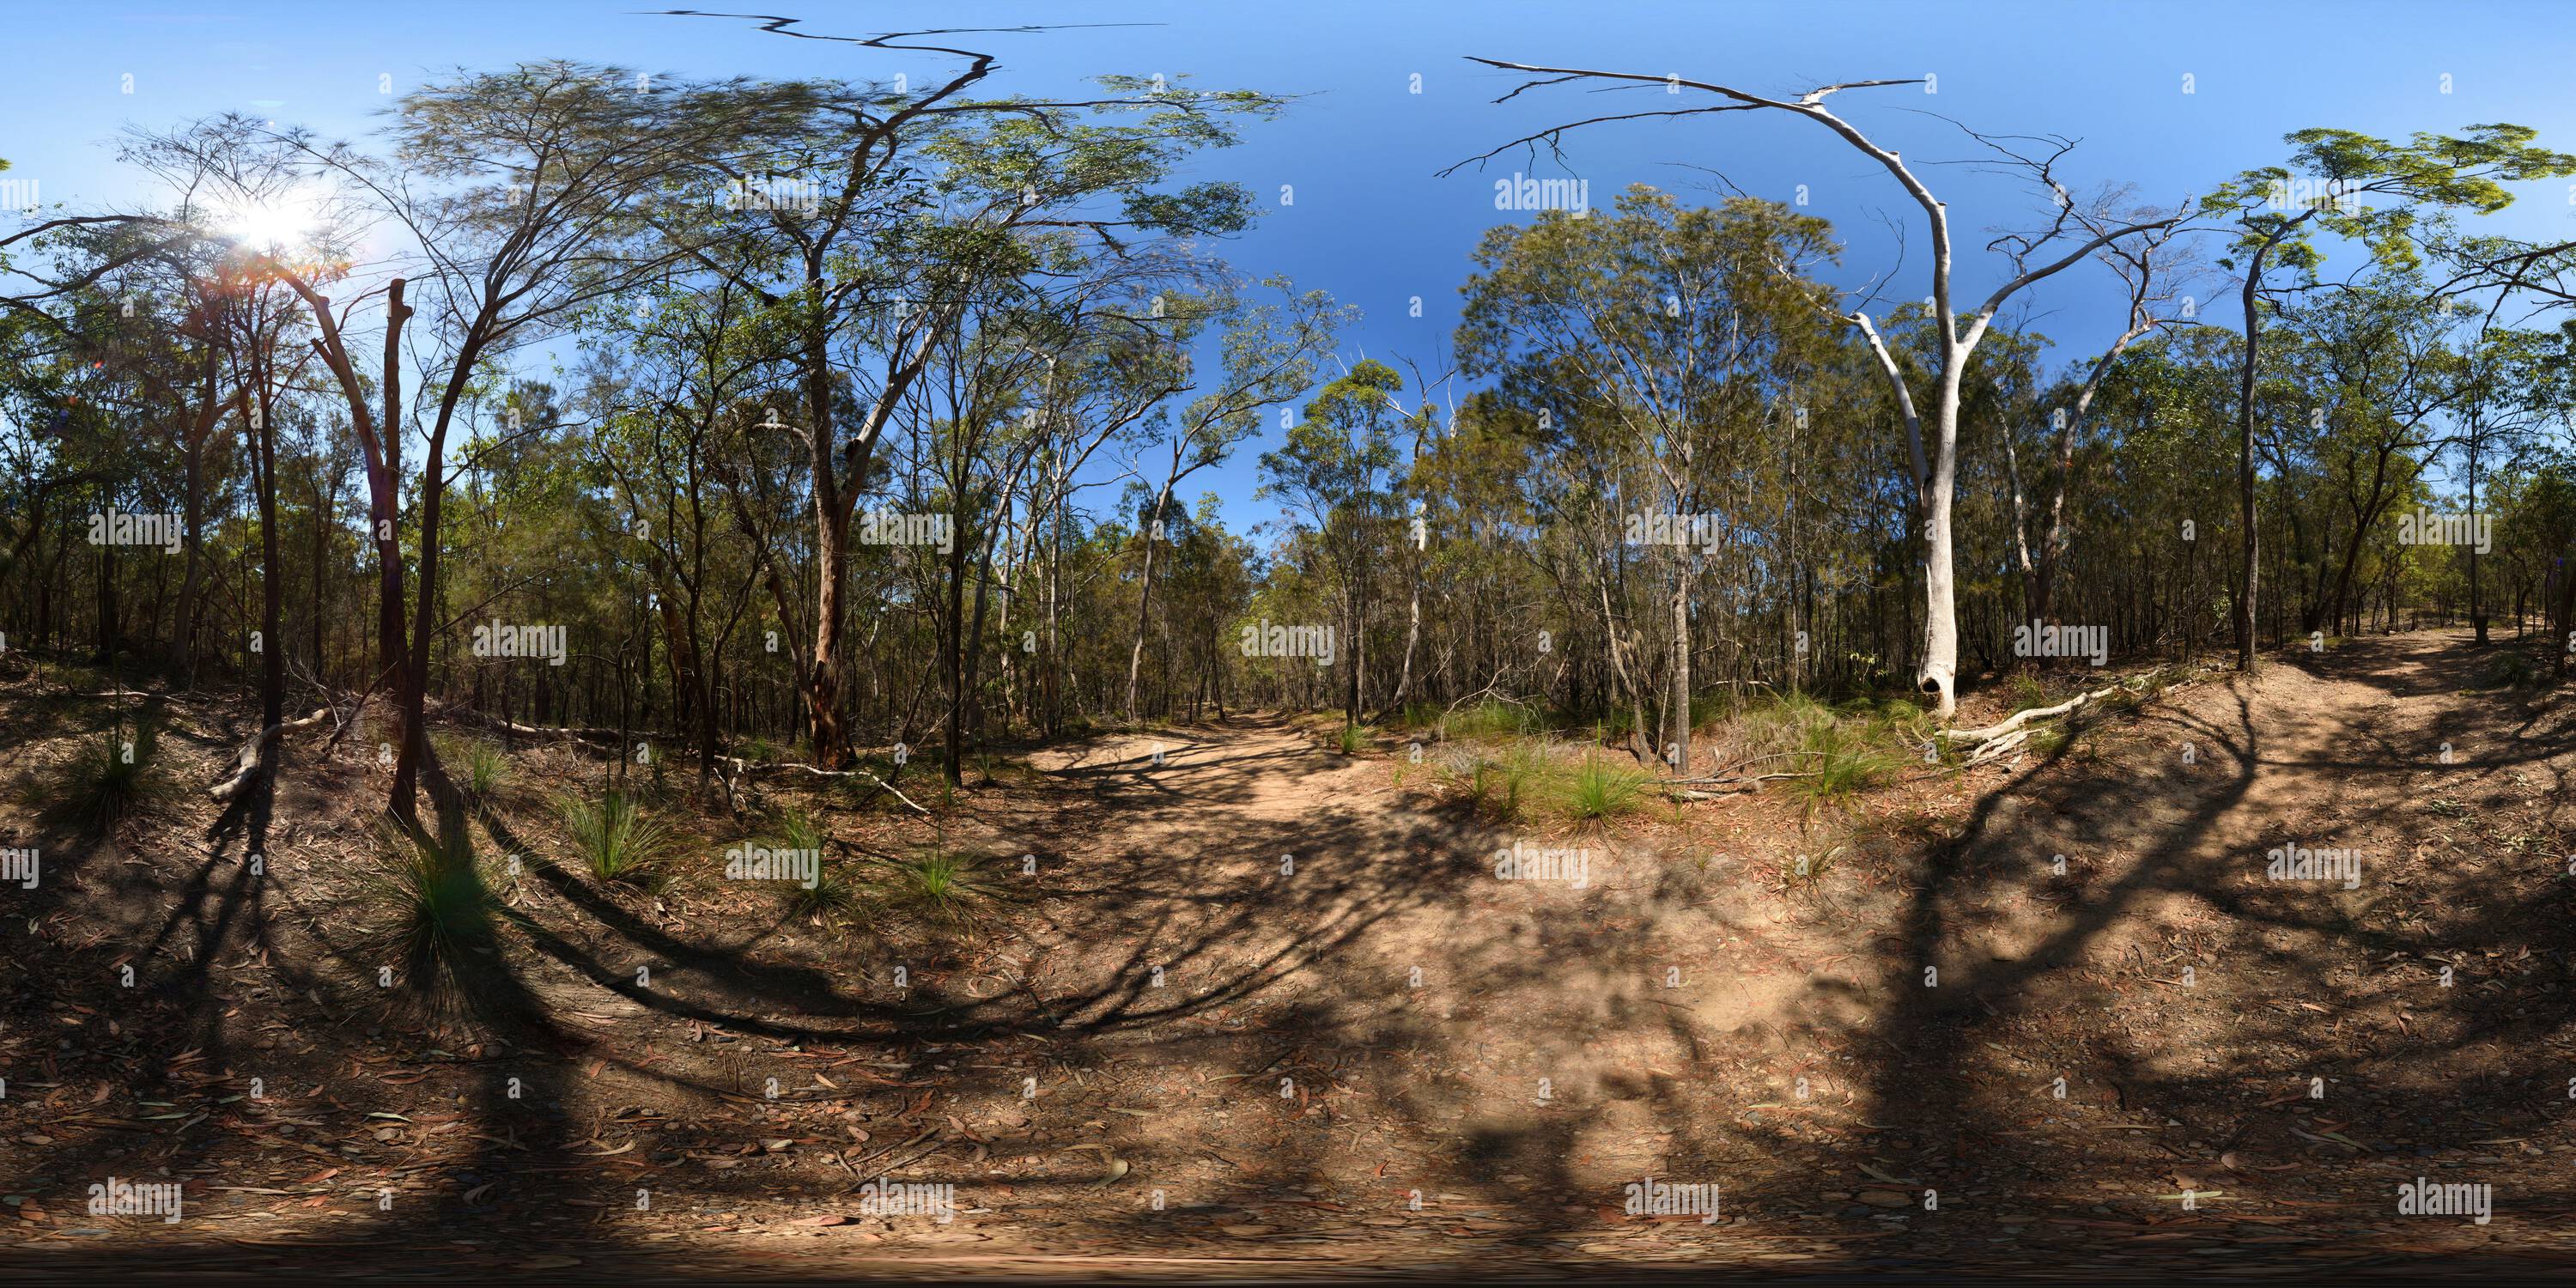 360 degree panoramic view of 360° panorama On the Gully Track, urban scrub Seven Hills Bushland Reserve, Eucalyptus and small Xanthorrhoea, Brisbane, Queensland